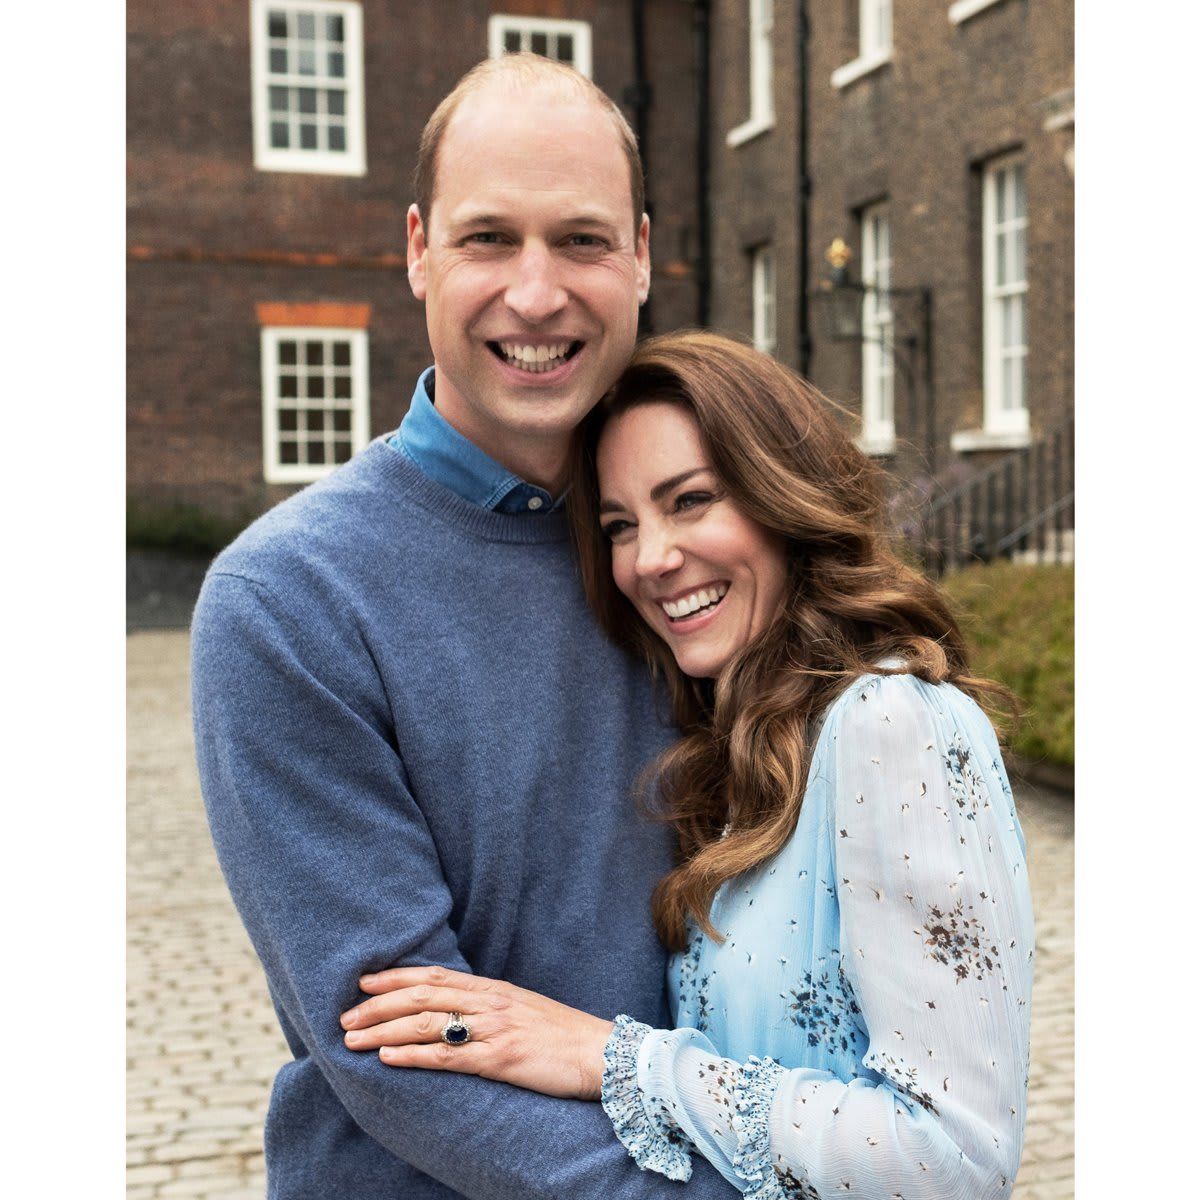 Two new portraits of the Duke and Duchess of Cambridge were released to mark their tenth wedding anniversary